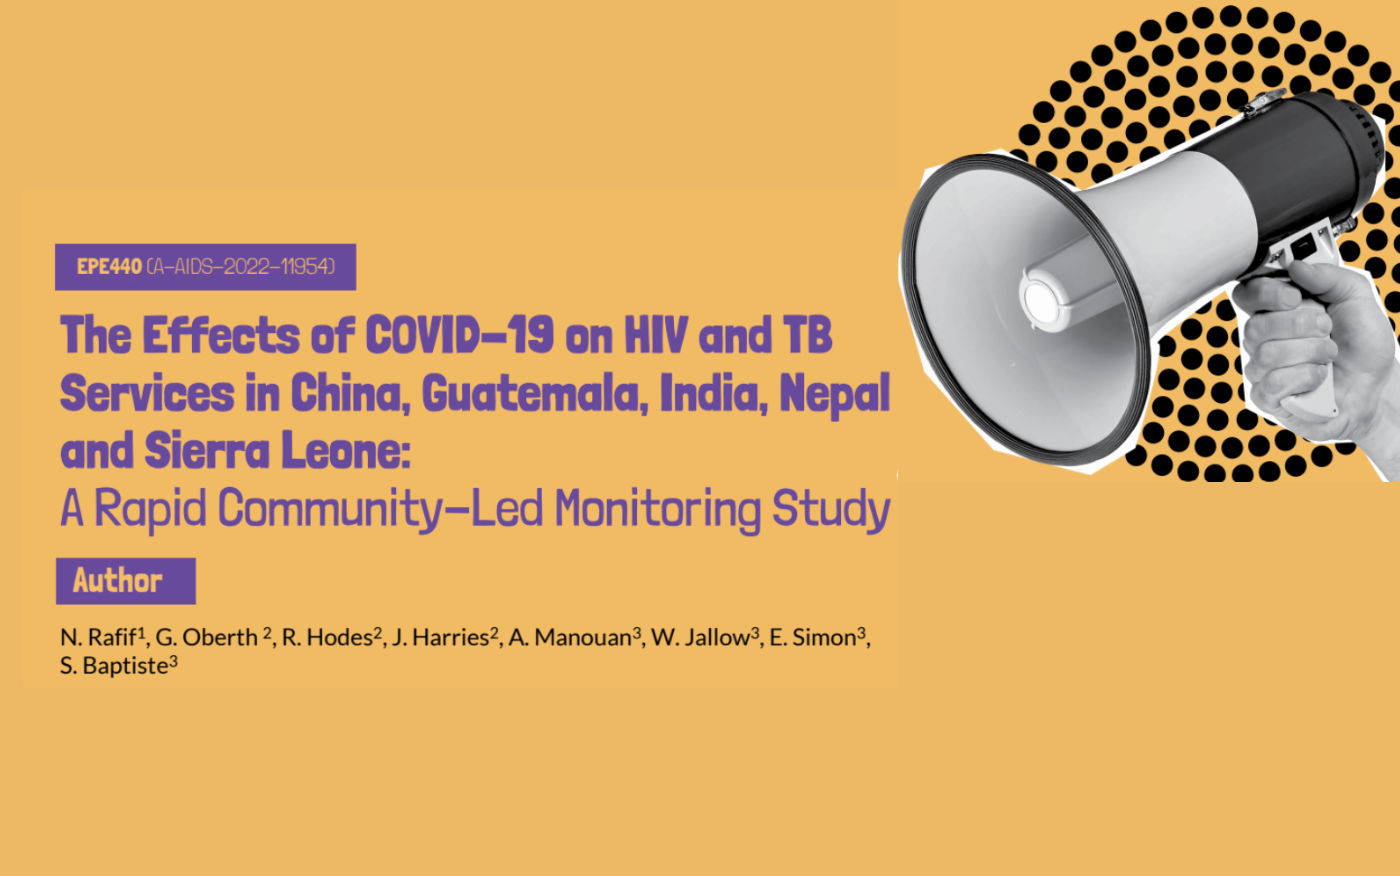 The Effects of COVID-19 on HIV and TB Services in China, Guatemala, India, Nepal and Sierra Leone A Rapid Community-Led Monitoring Study